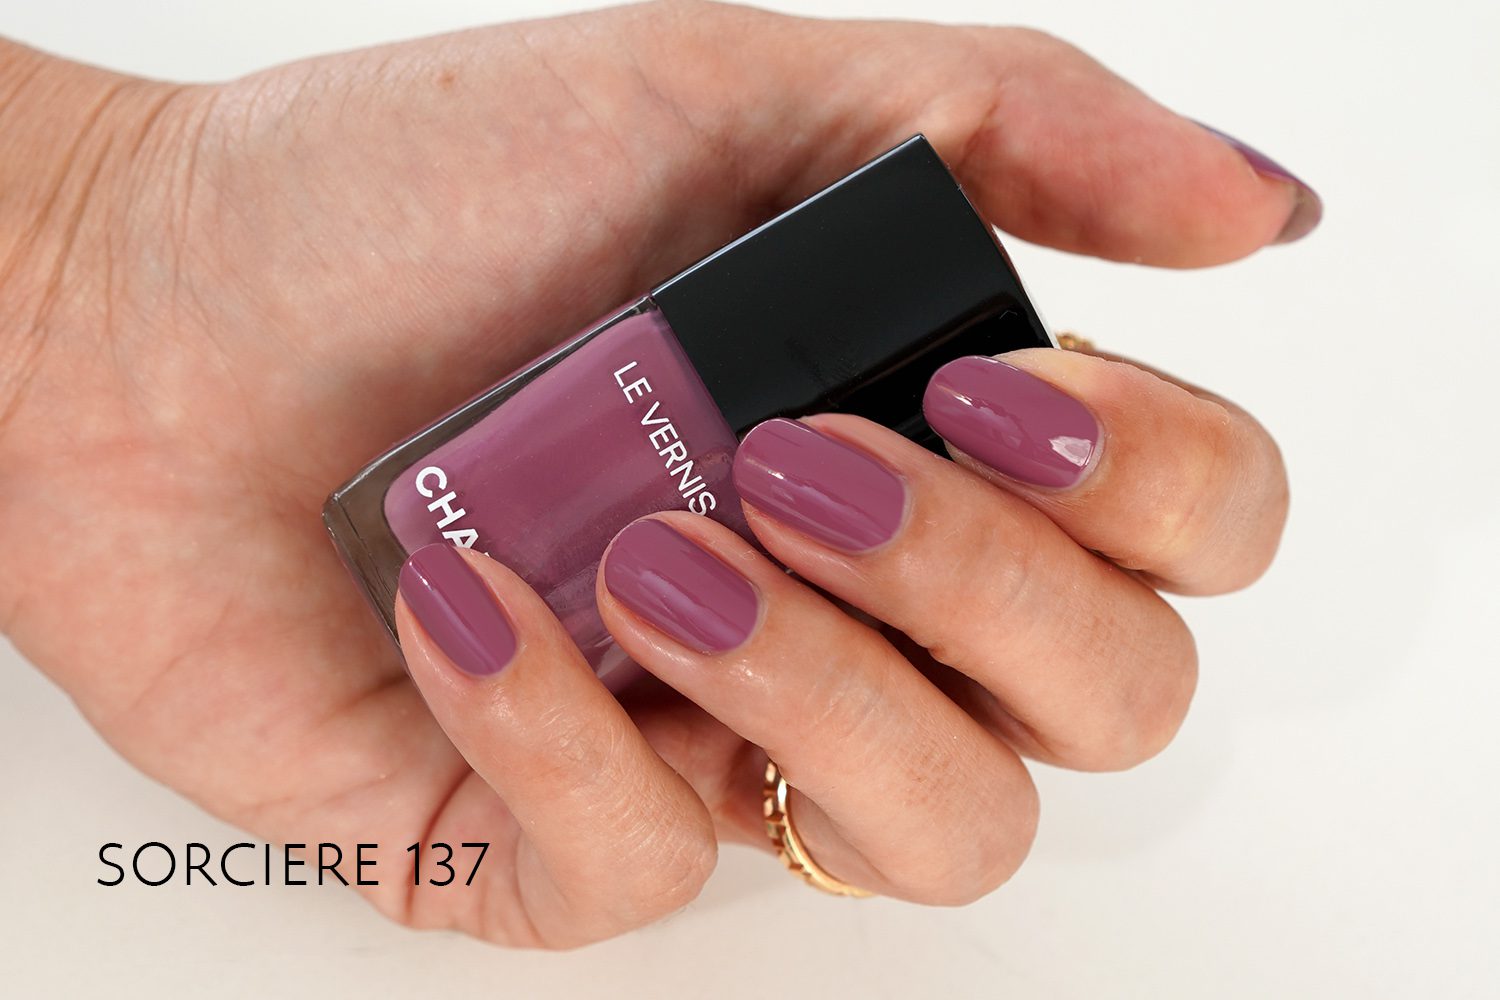 Chanel Le Vernis Nail Colour • Nail Lacquer Review & Swatches